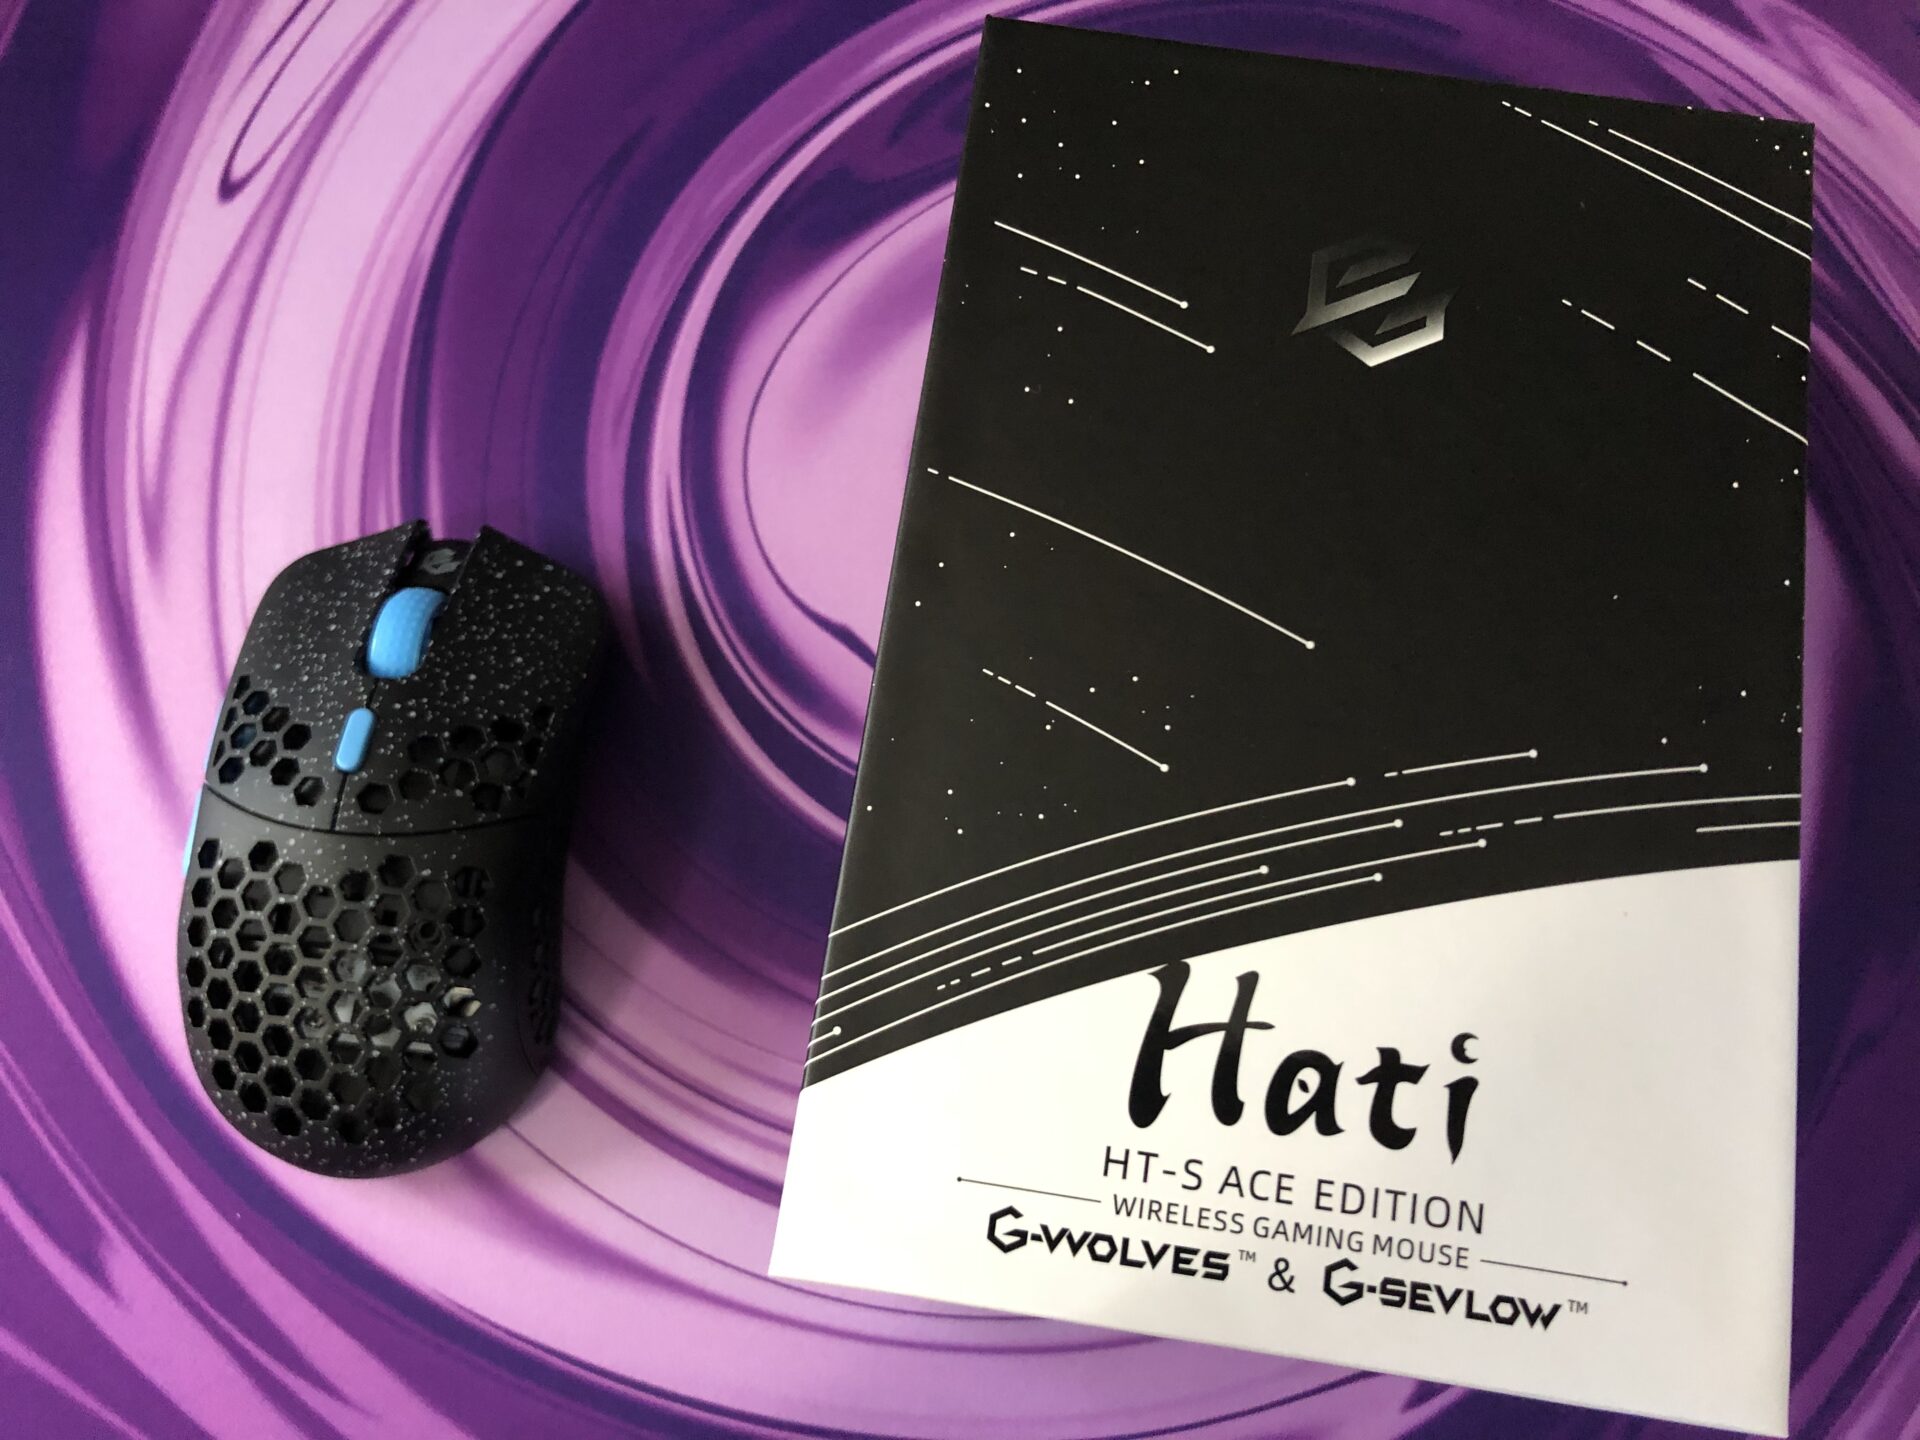 G-wolves HT-s Wireless ACE EDITION